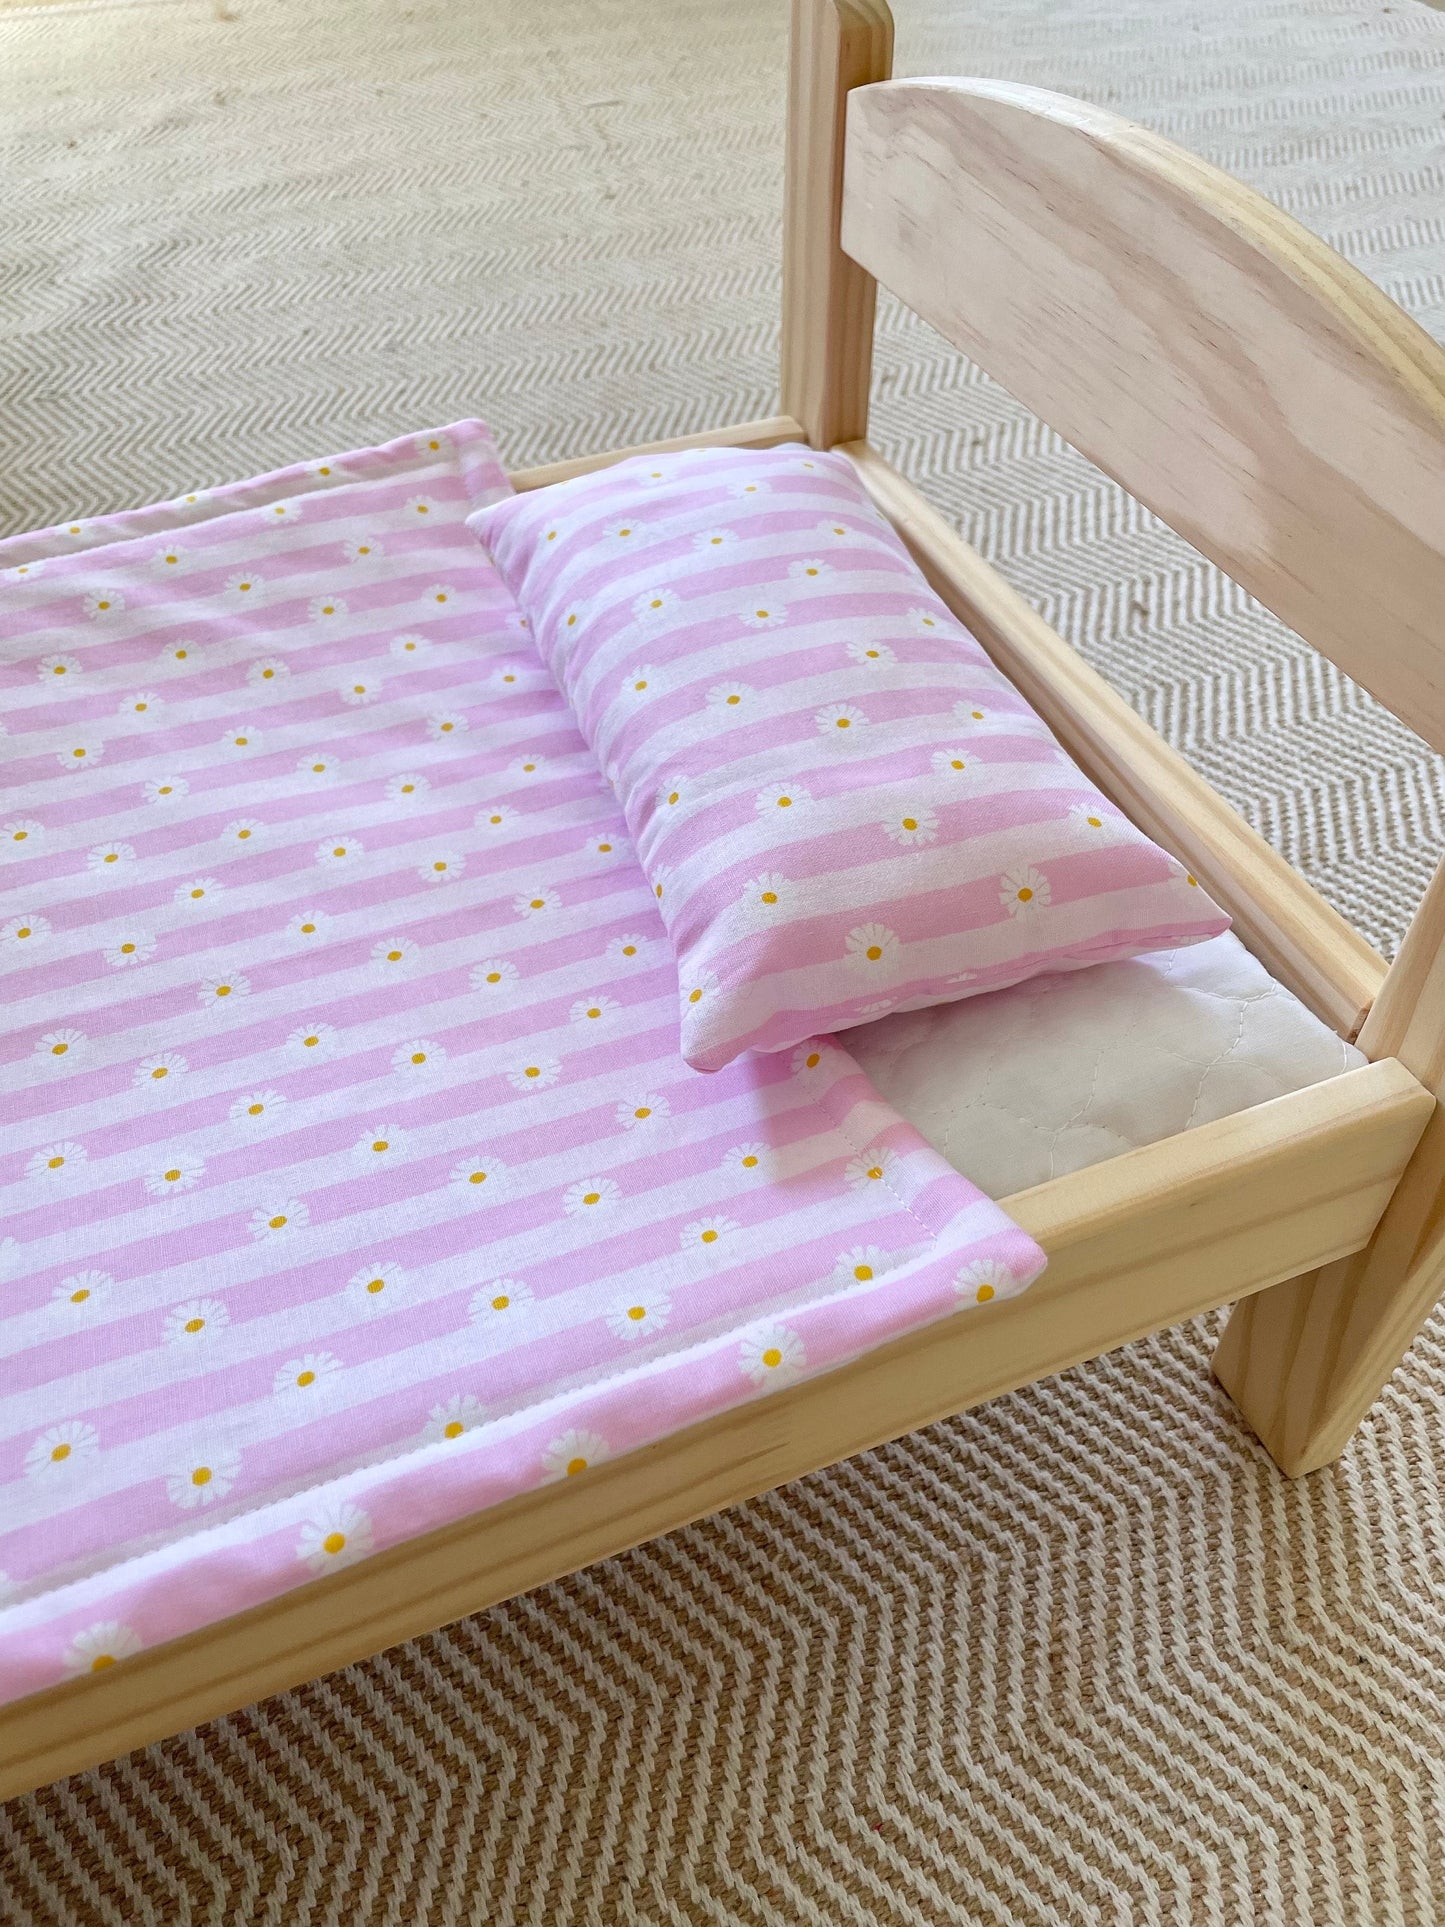 Pink 18 inch Doll quilt, Linen Set Daisy Bedding - doll crib blanket, Target doll cot, doll doona, bed cot quilt, bedding, play baby linen